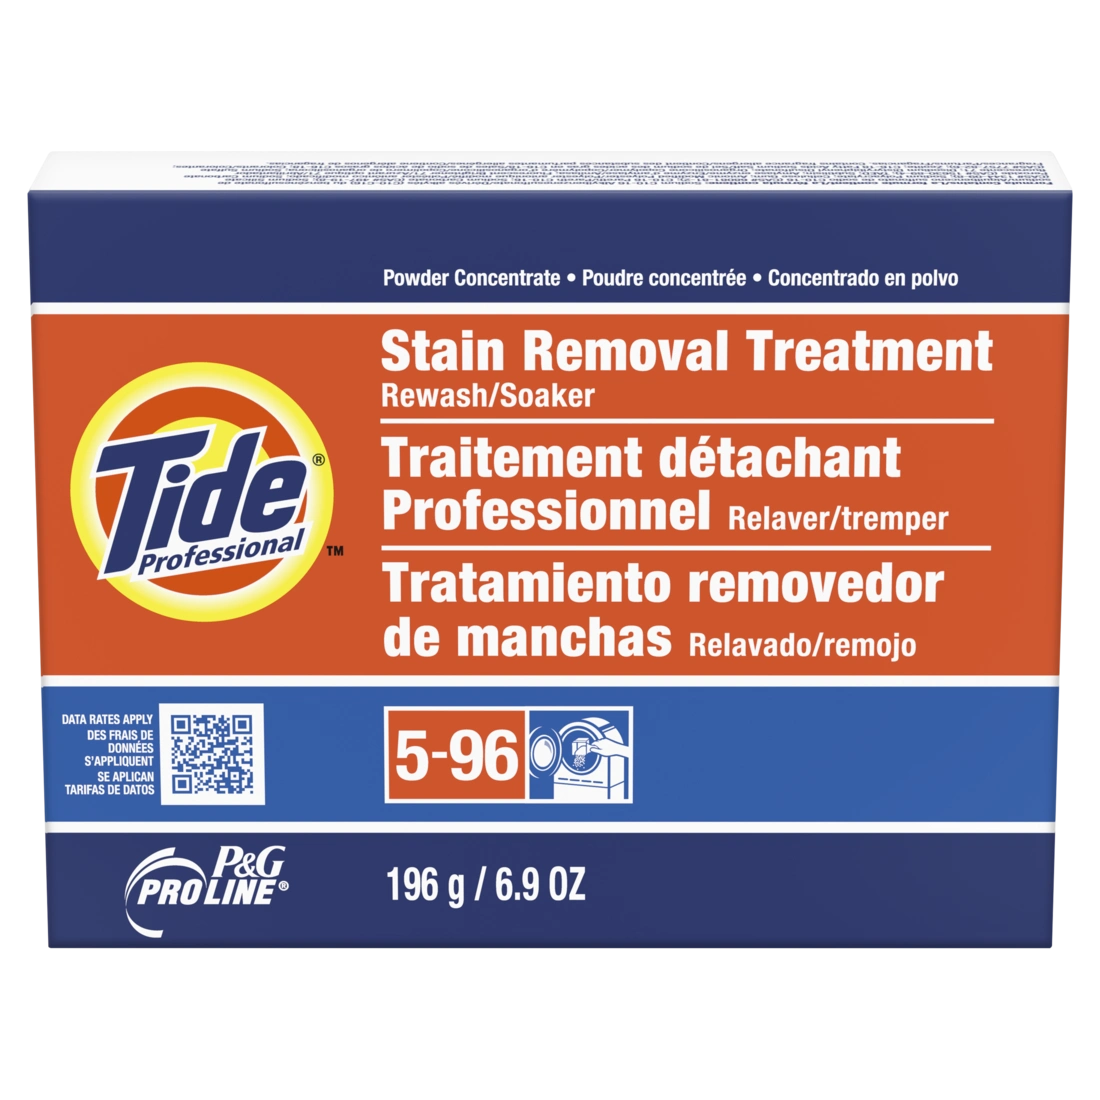 P&G Pro Line  Stain Removal Treatment product image